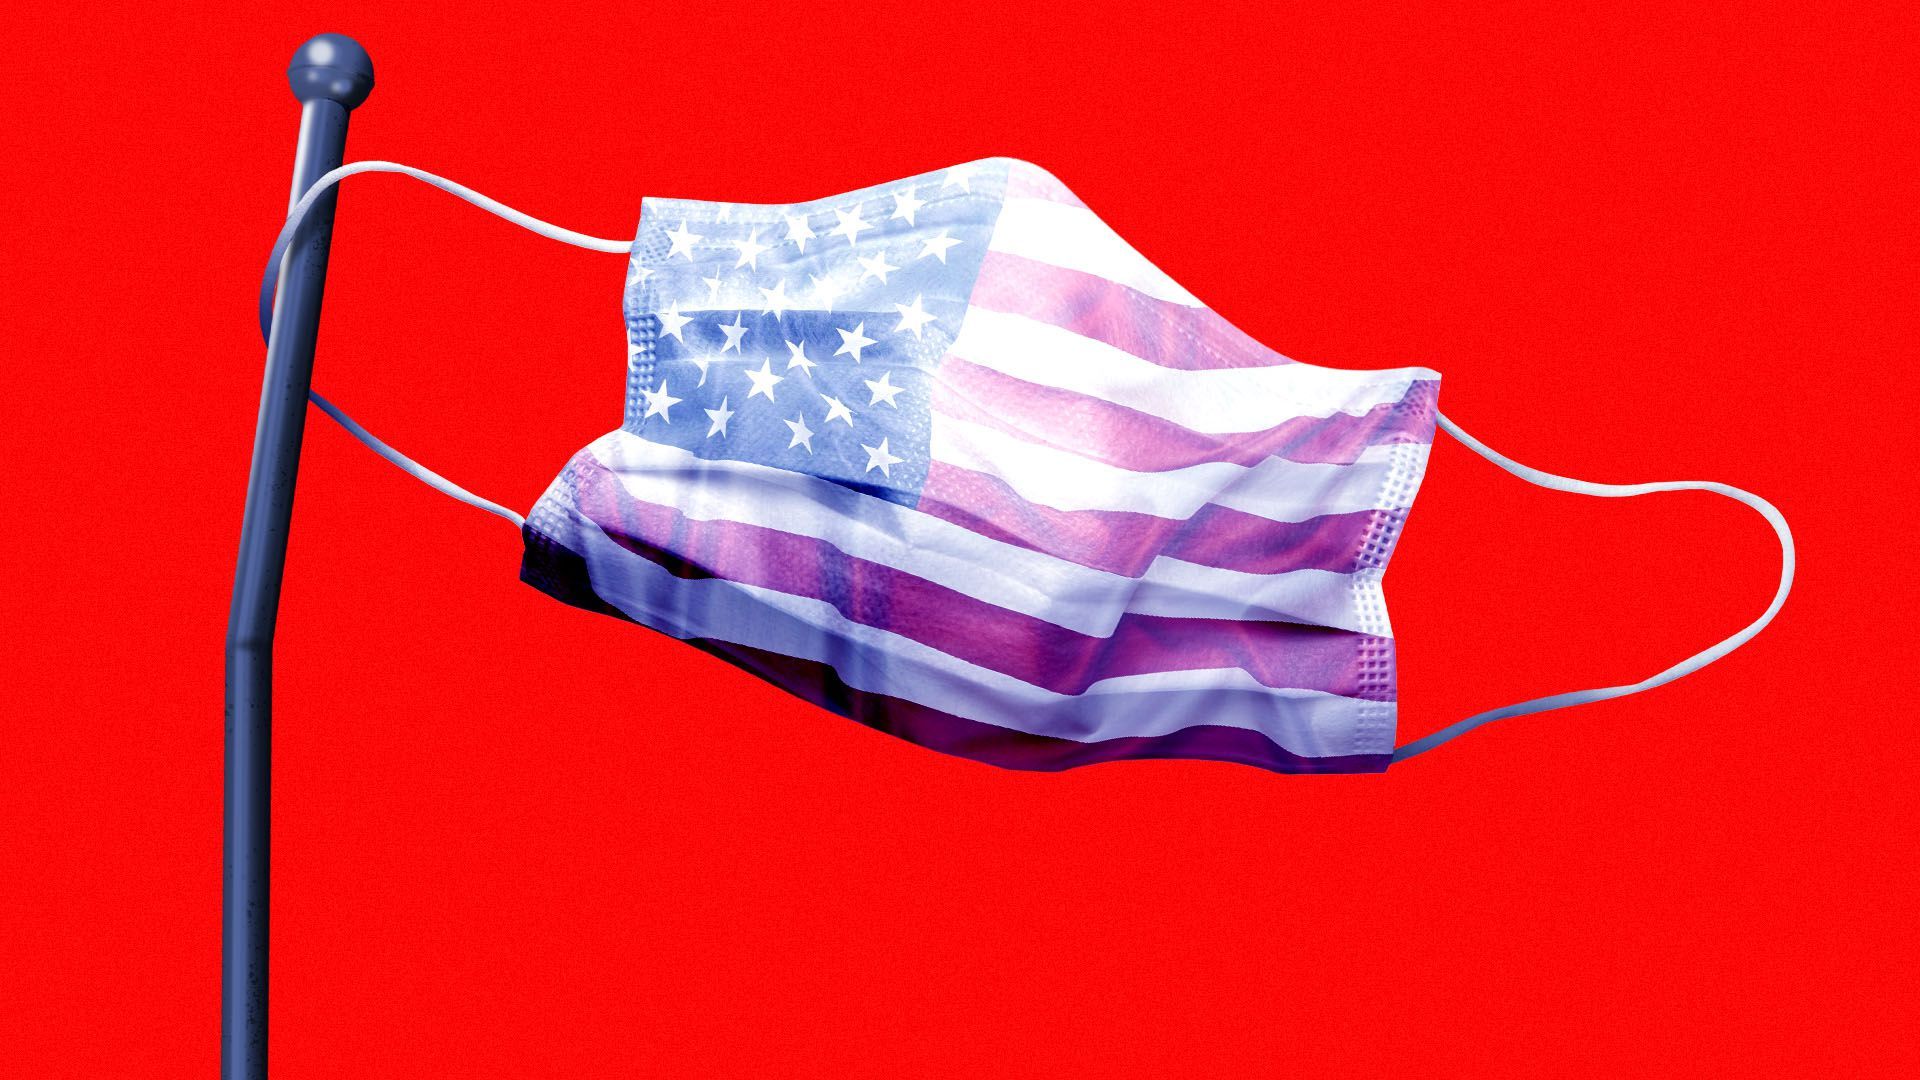 Illustration of a flagpole being bent by a medical mask with a United States flag on it